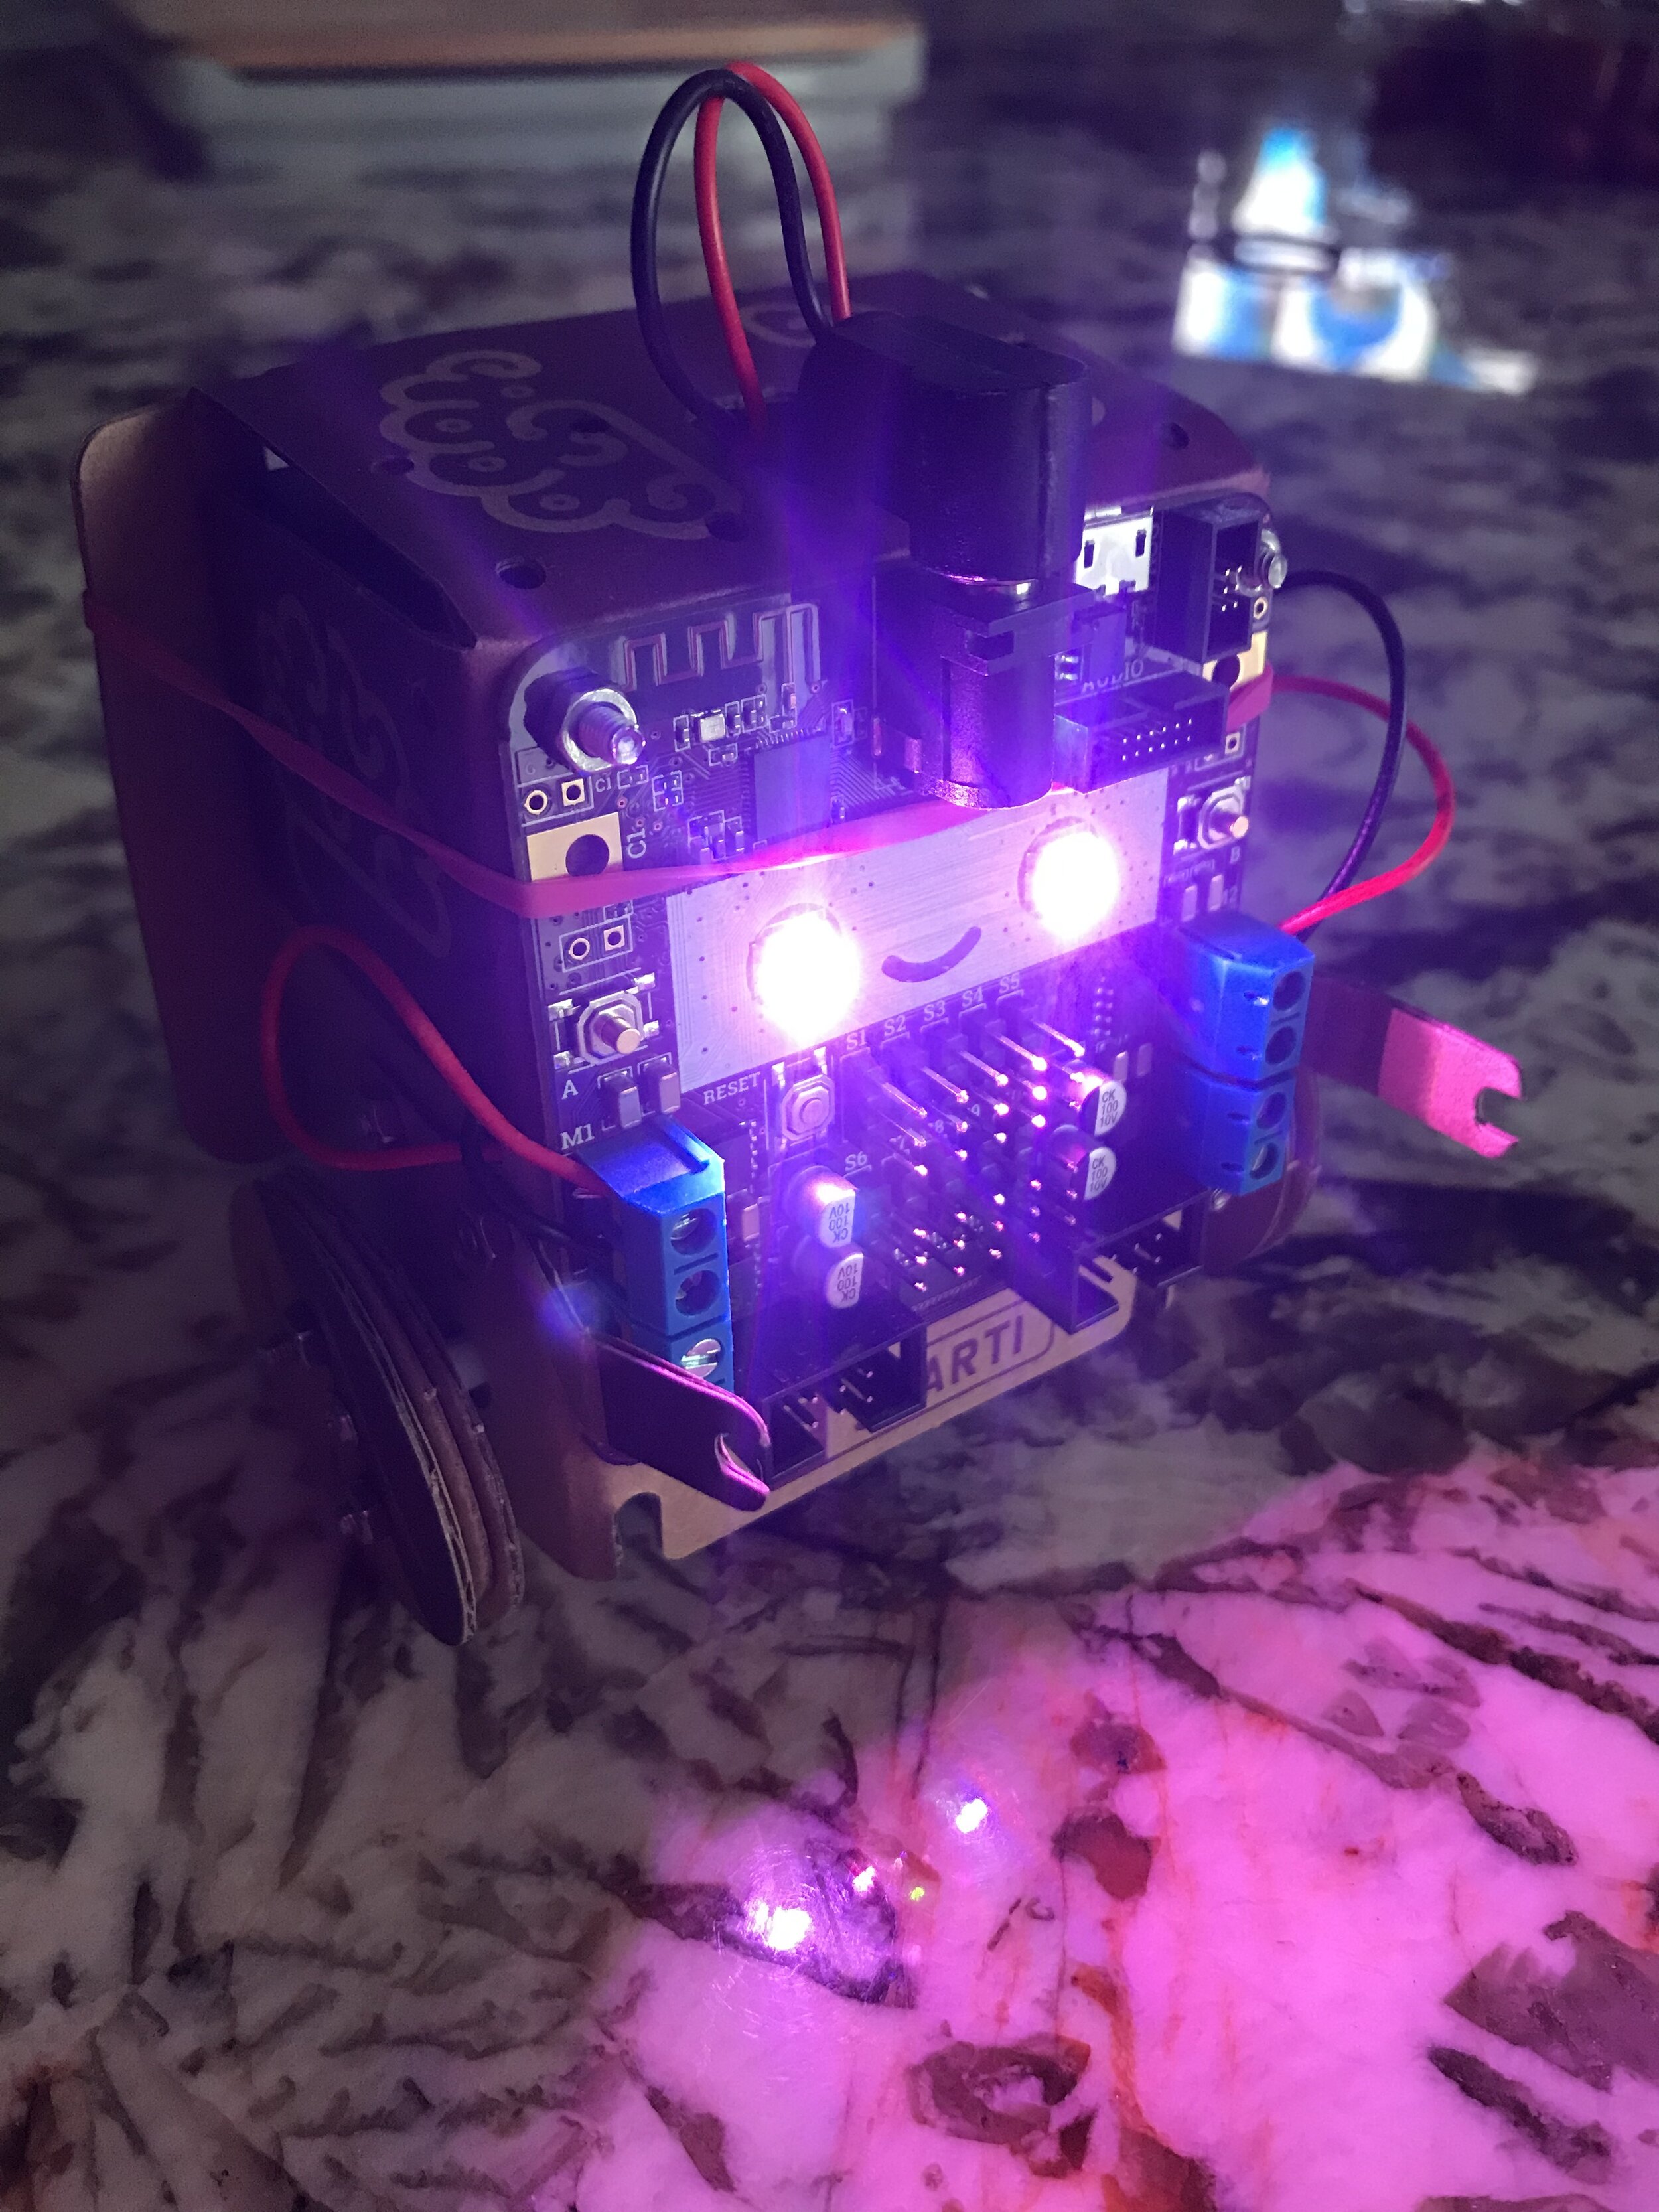 SmartiBot, one of two DIY programmable robots we got at Xmas